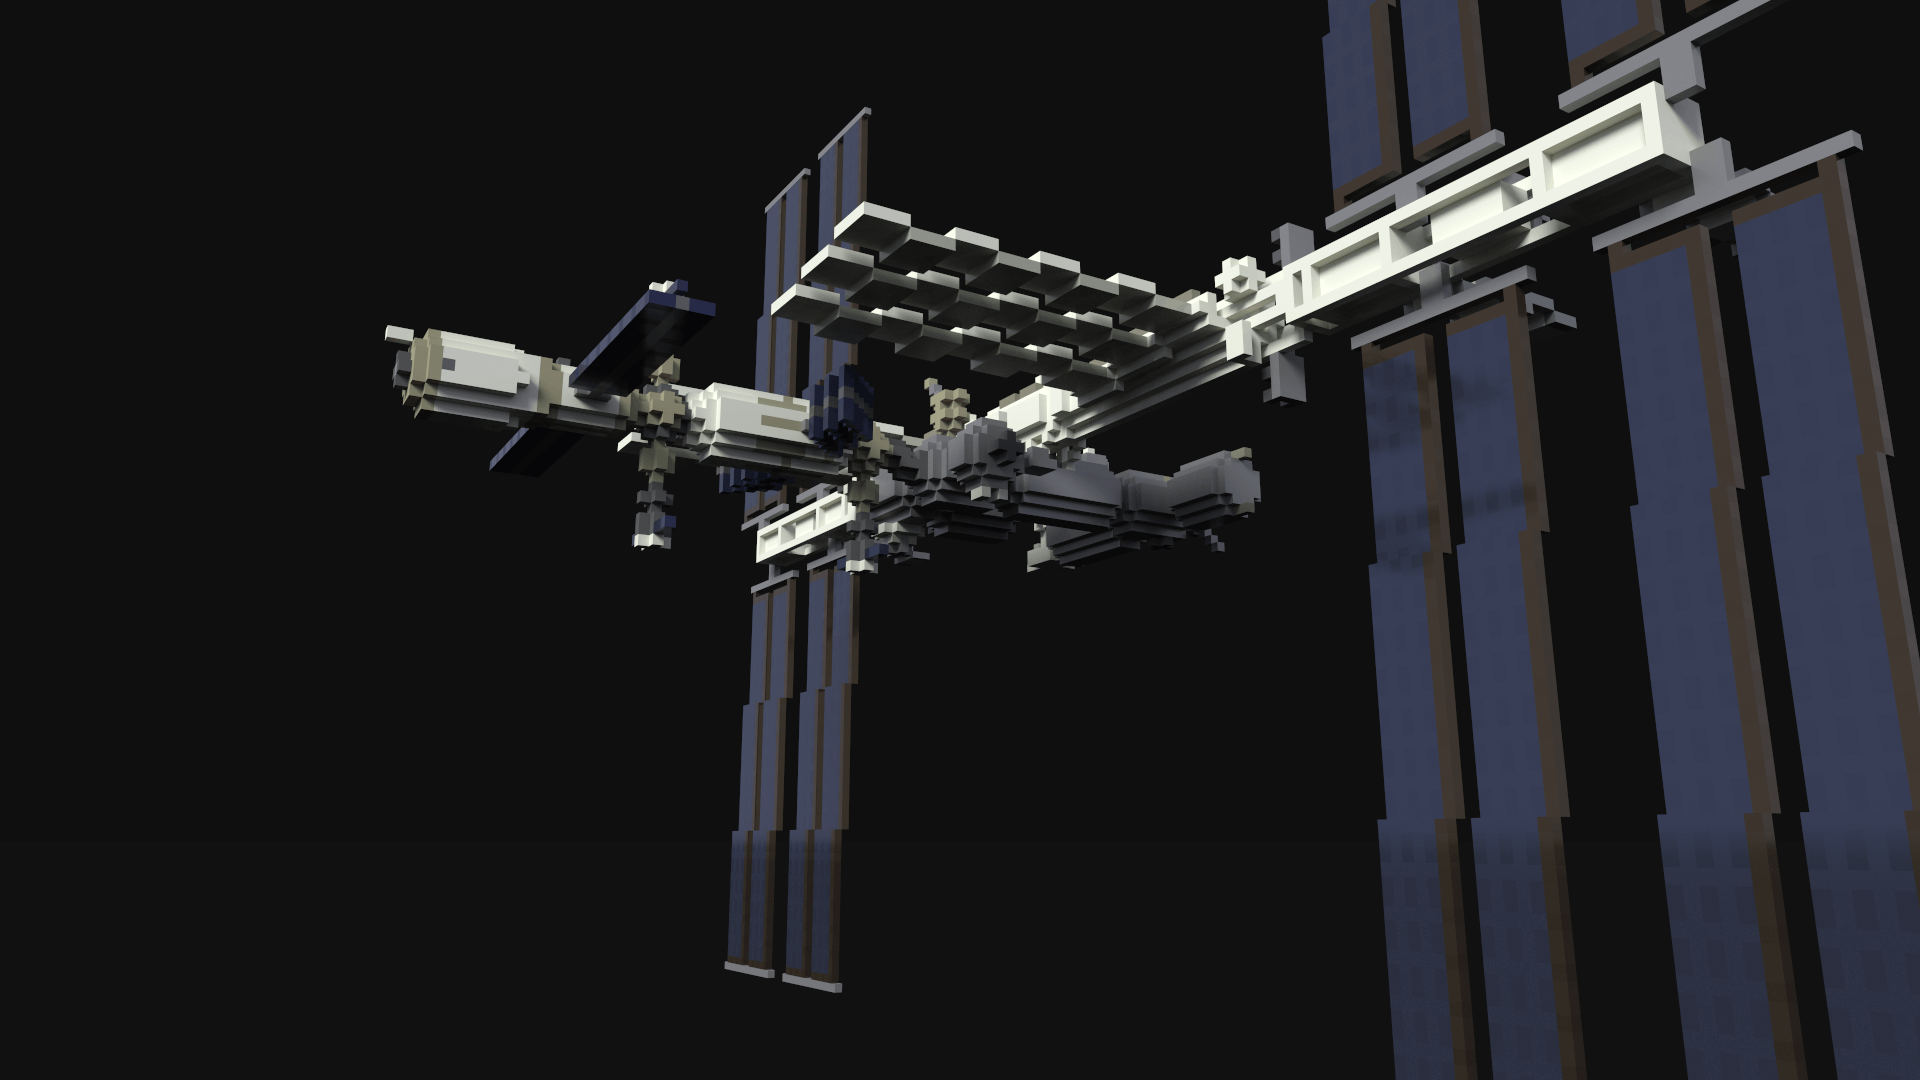 ISS Voxel Art